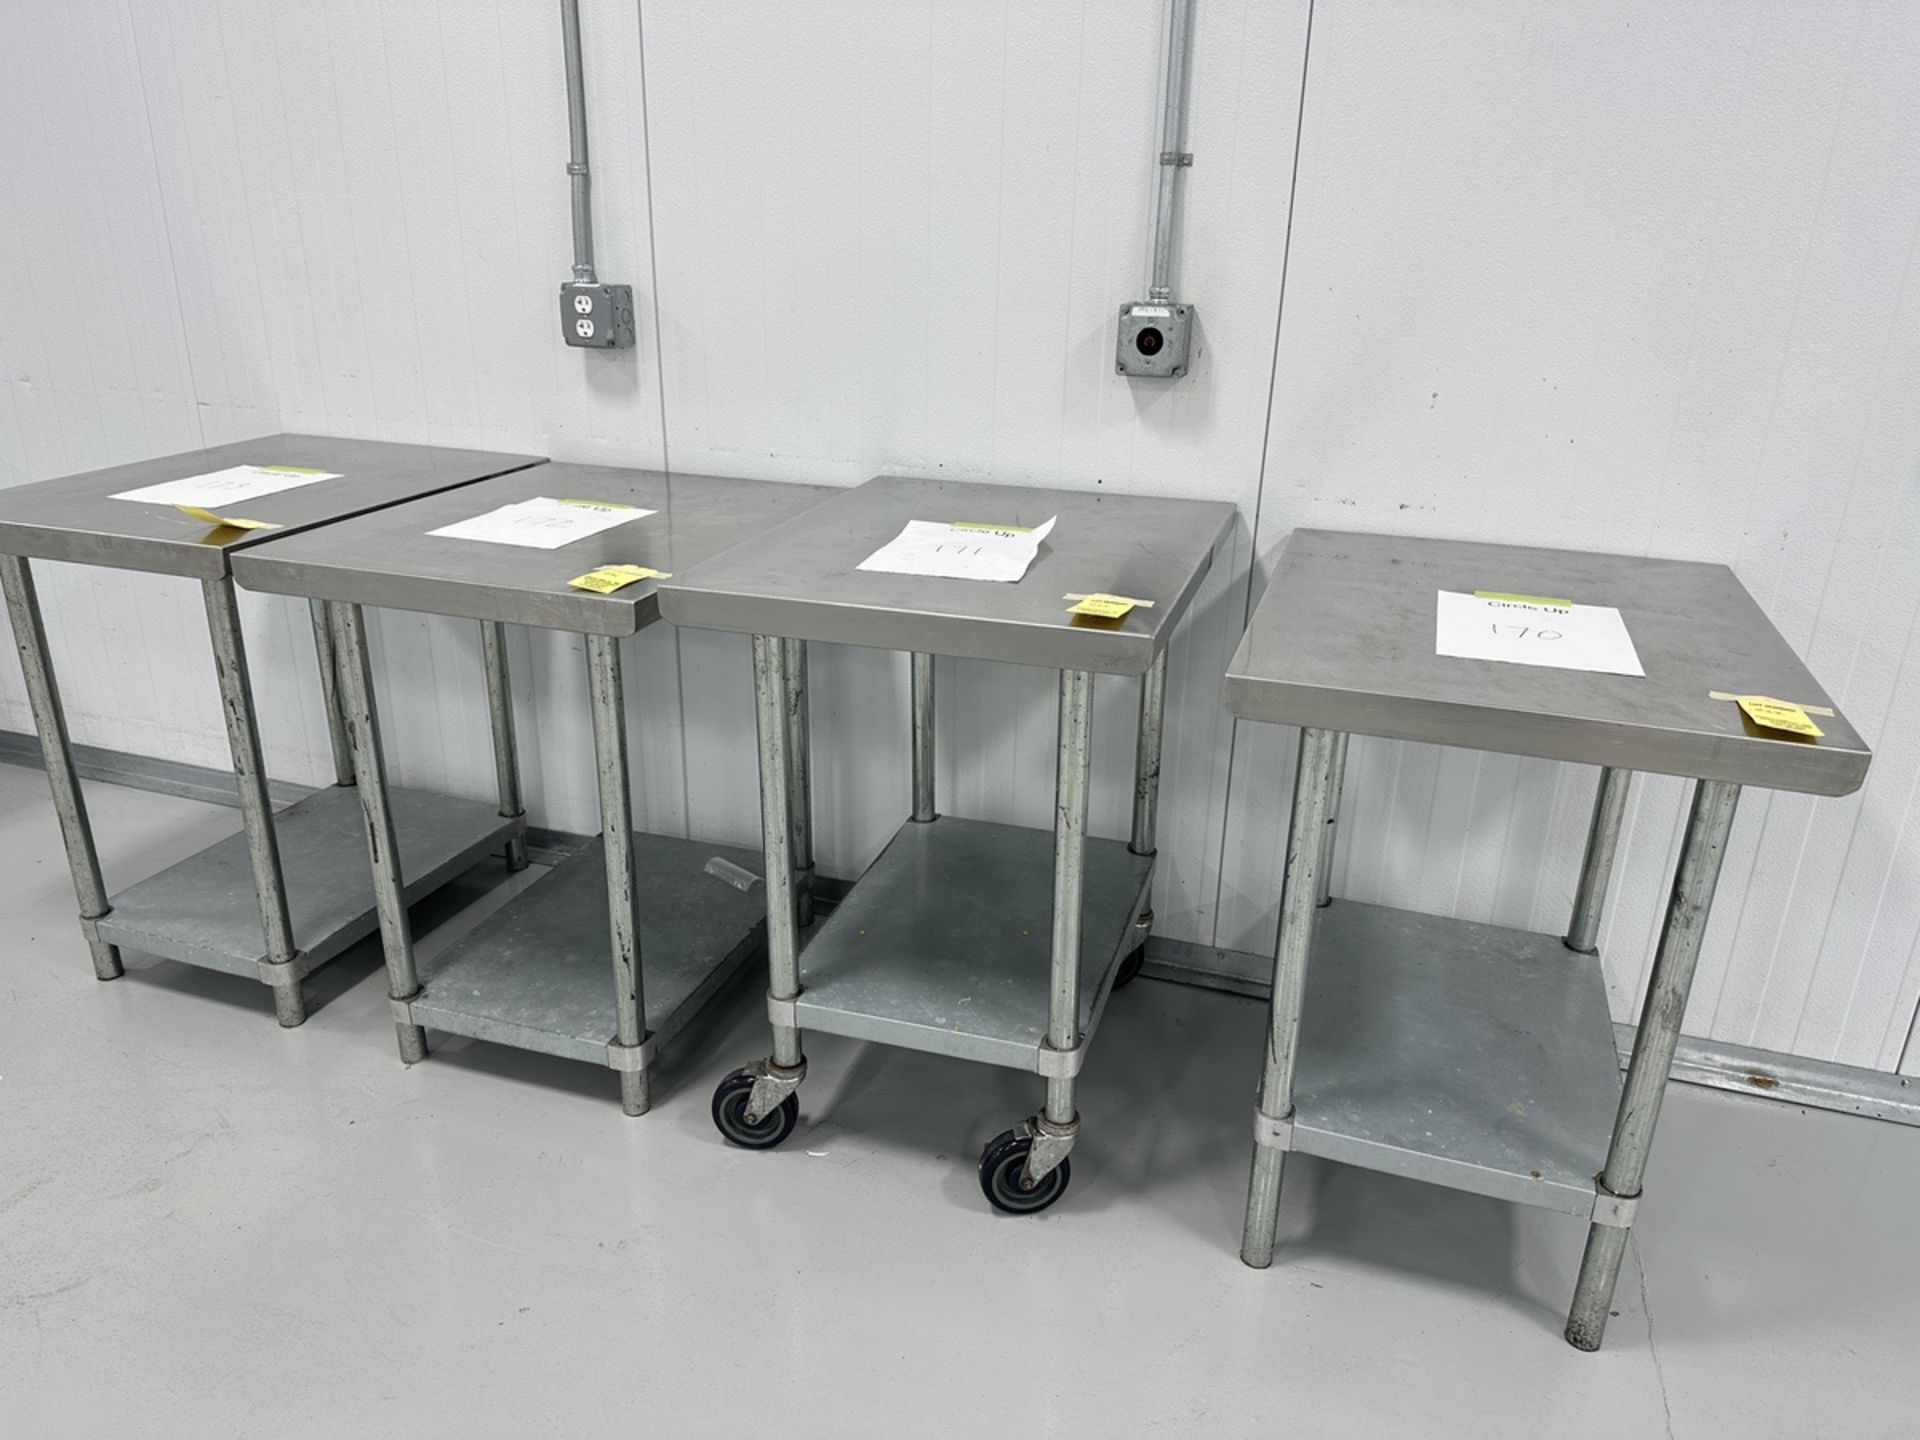 LOT (4) 2' x 30" Asst. Stainless Steel Tables | Rig Fee $50